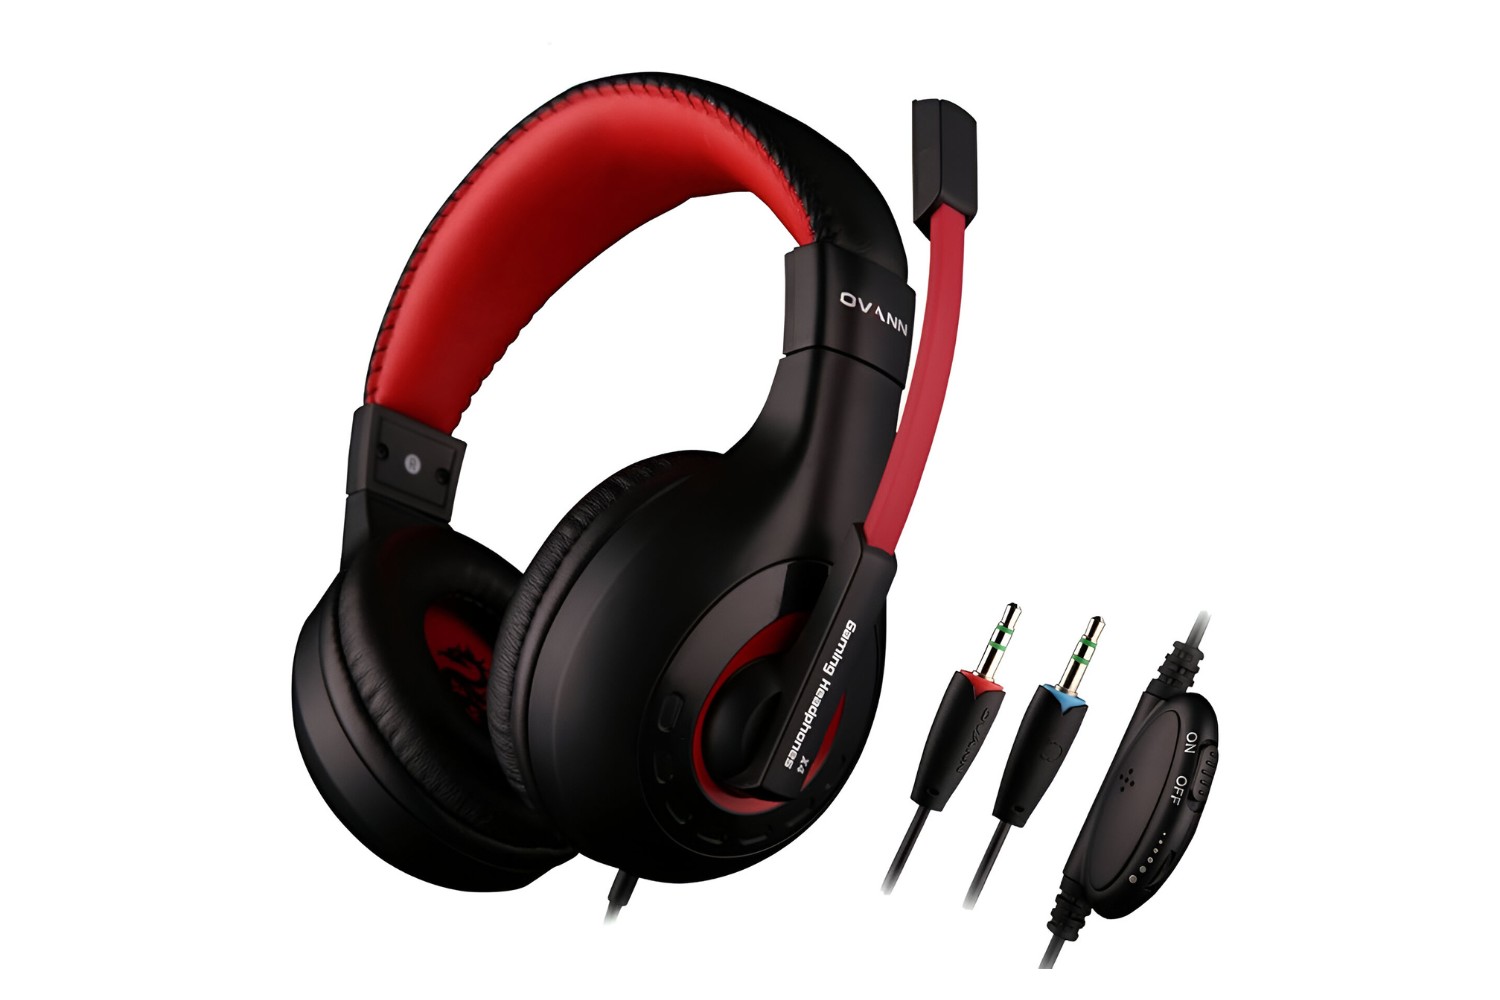 Ovann X Stereo PC Gaming Headset: How To Work